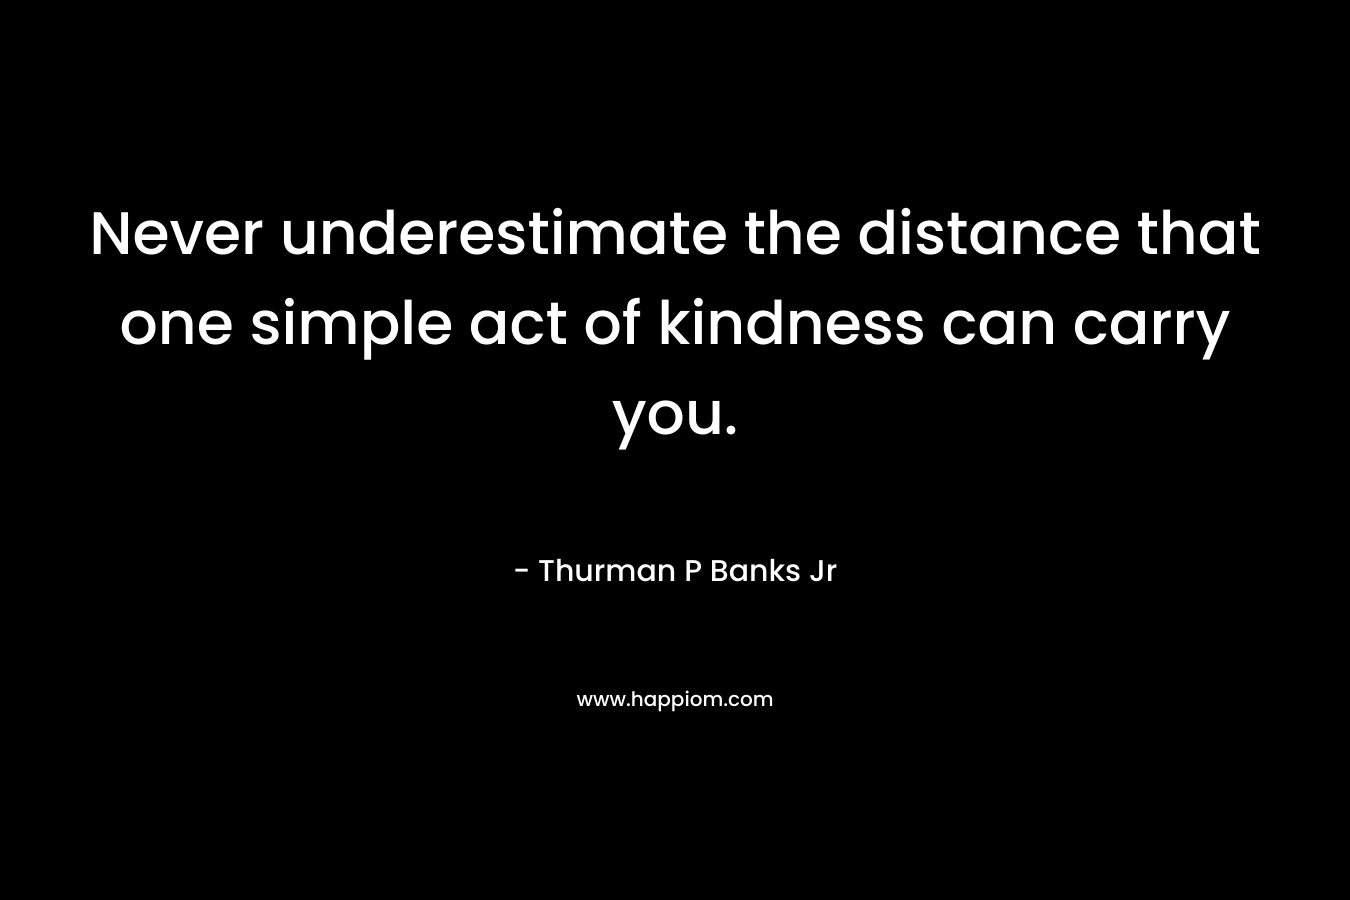 Never underestimate the distance that one simple act of kindness can carry you.